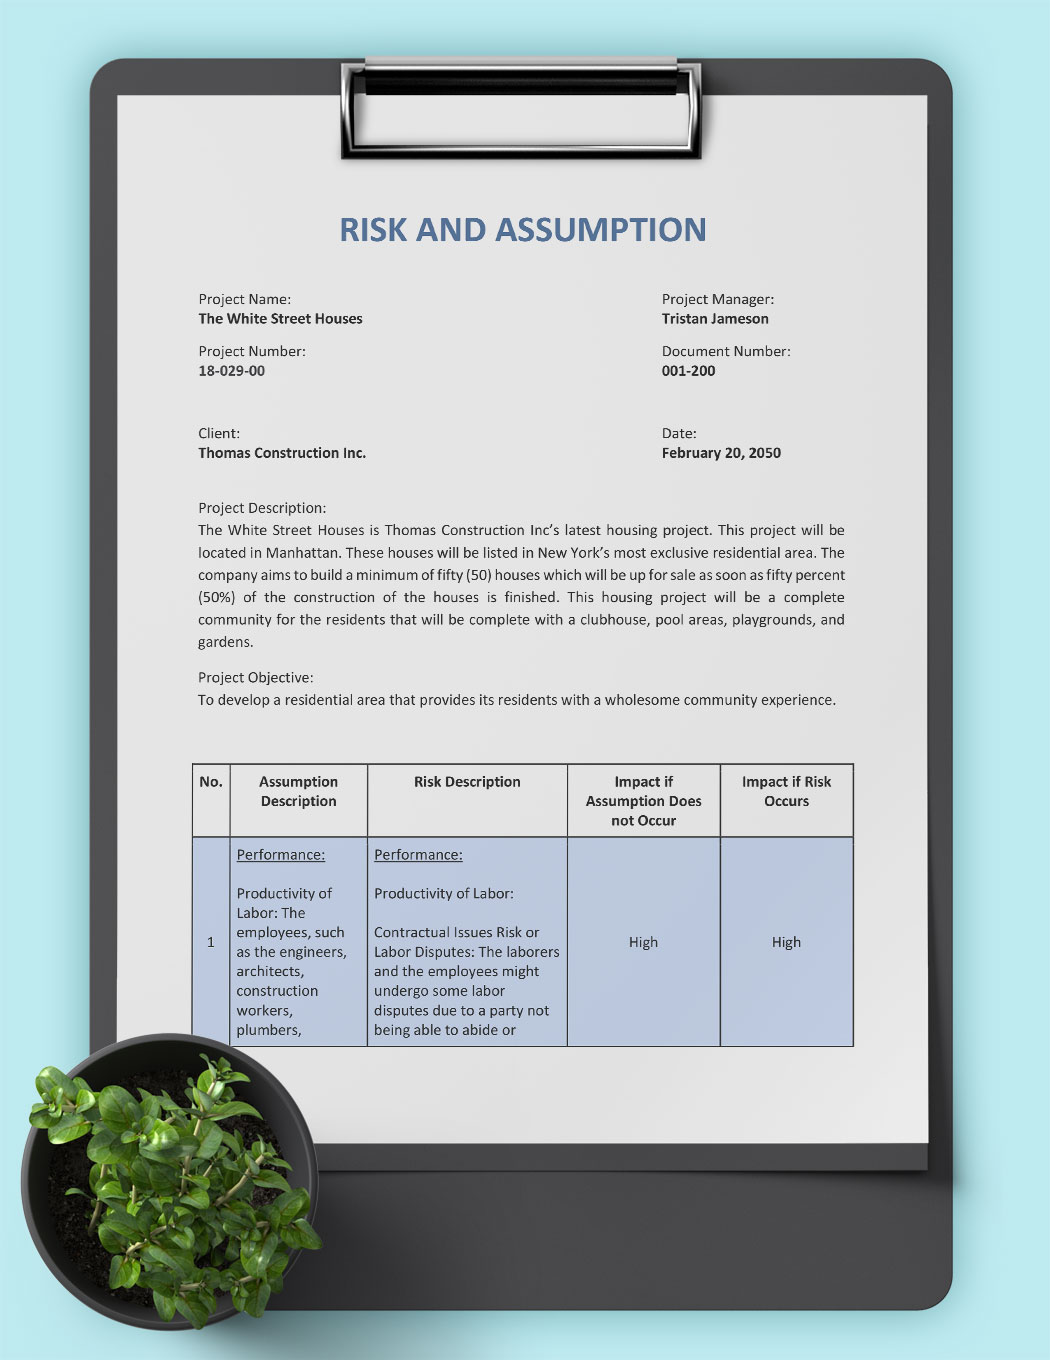 Risks And Assumptions Template in Word, Google Docs